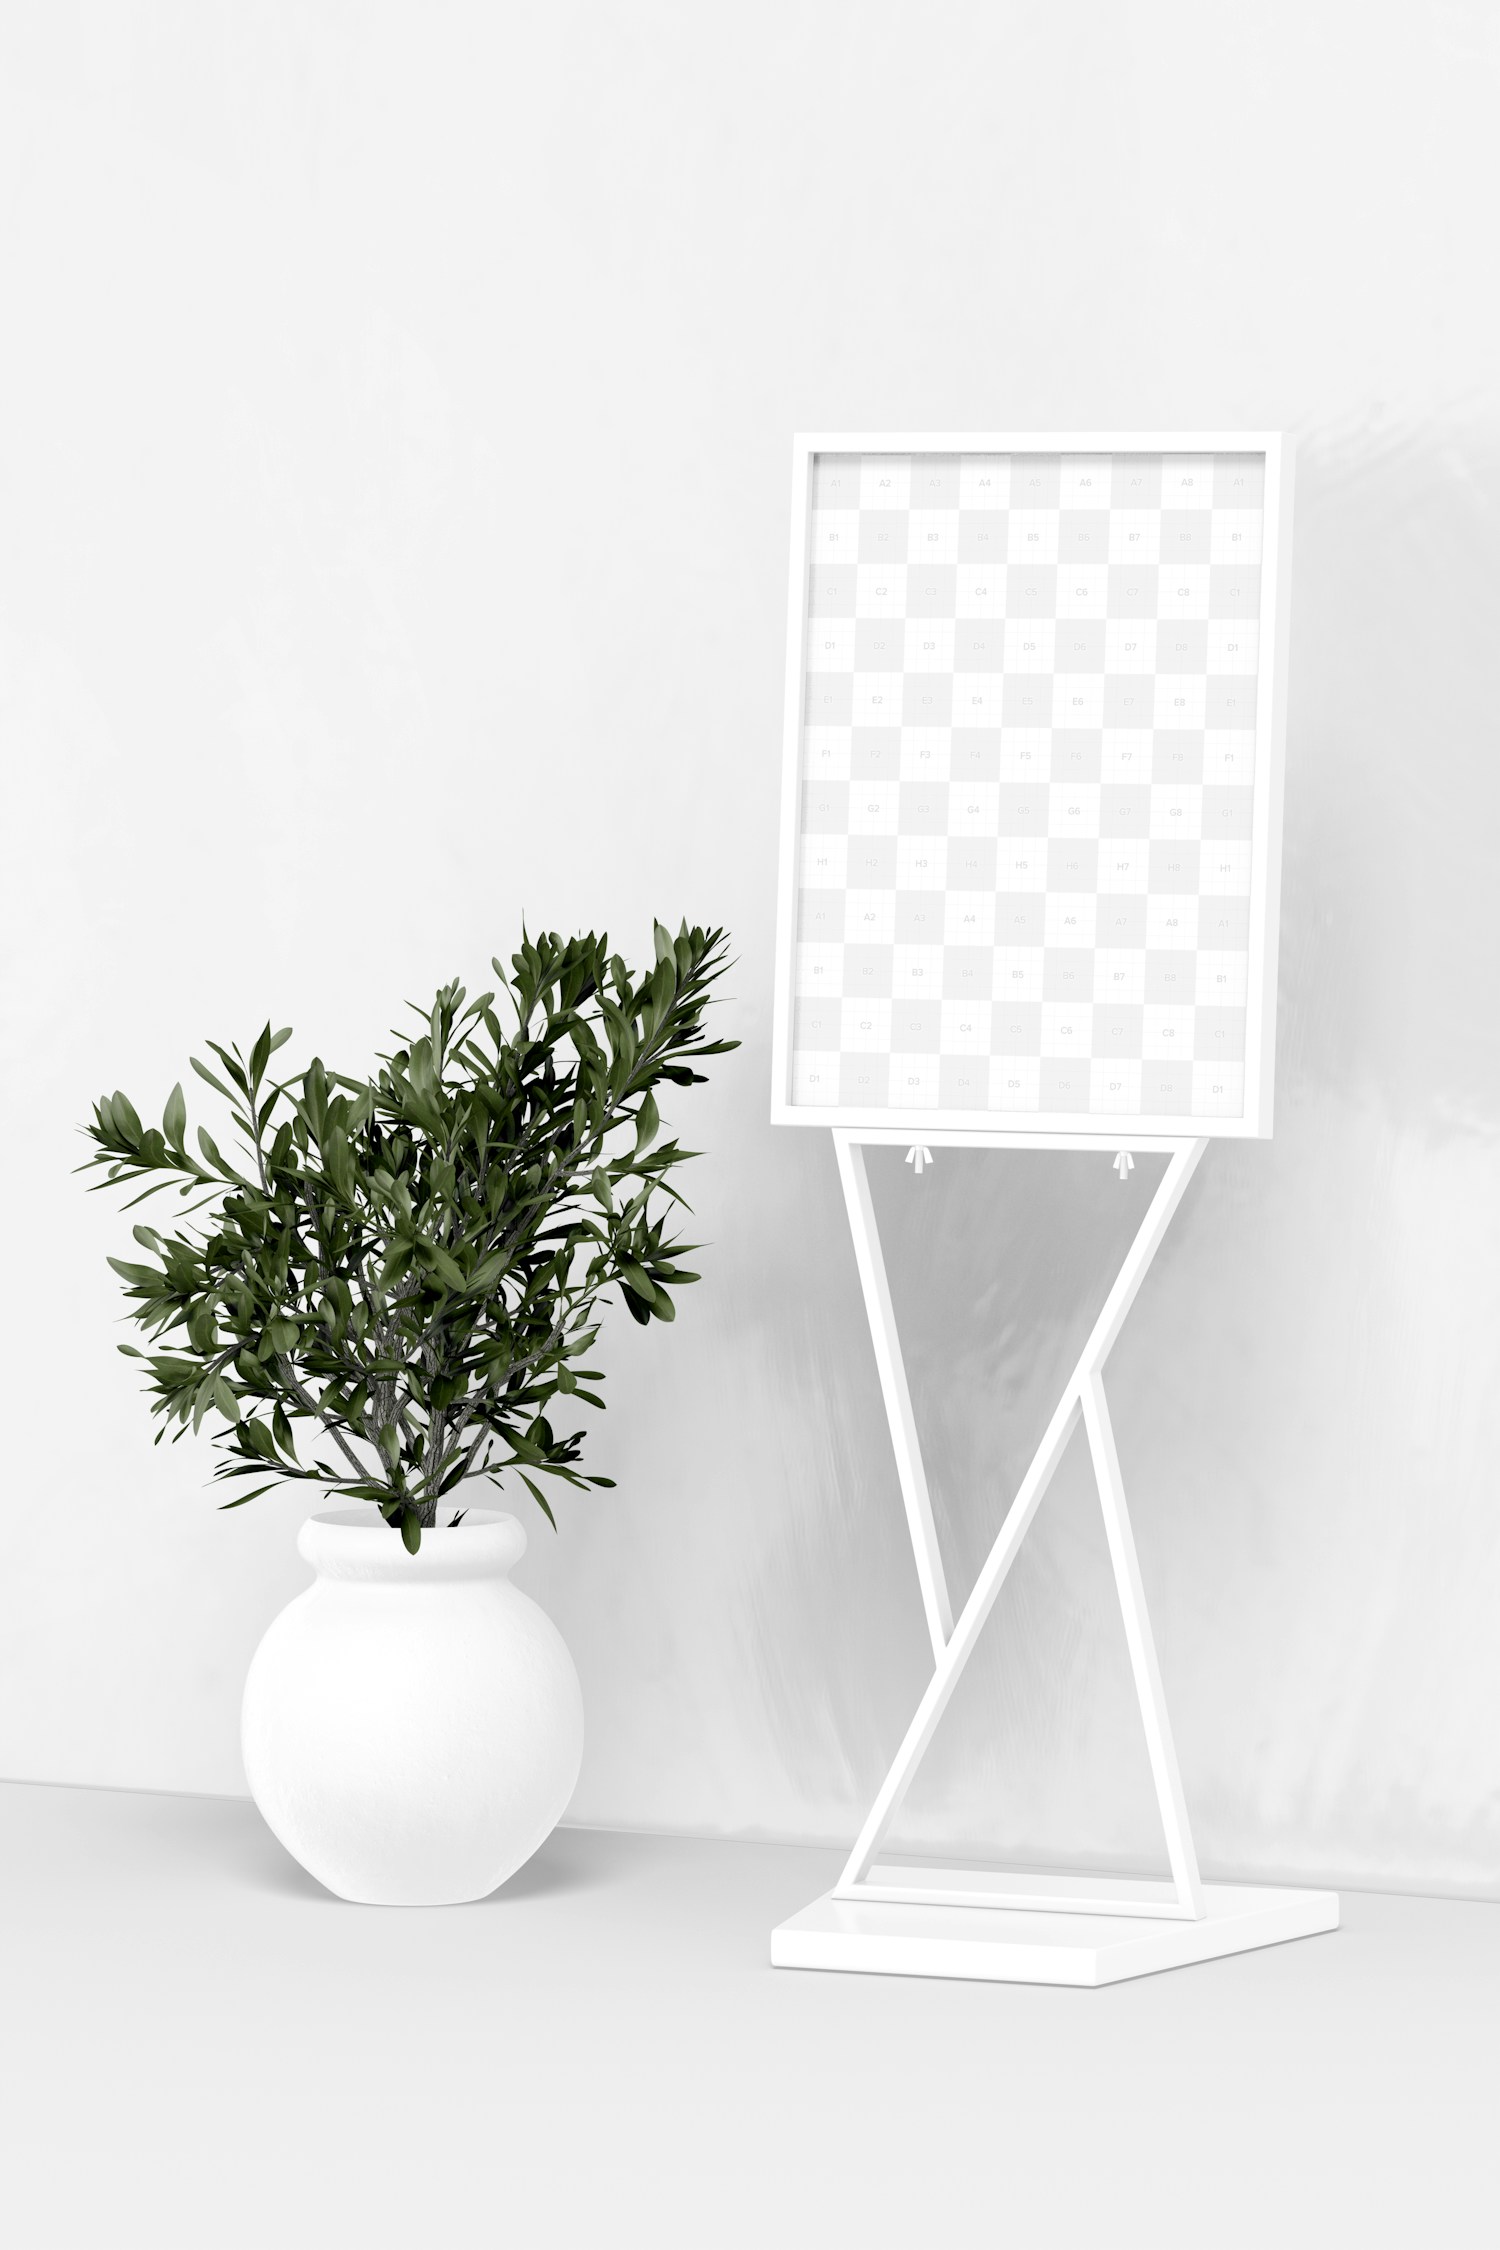 Pedestal Poster Stand Mockup, with Plant Pot